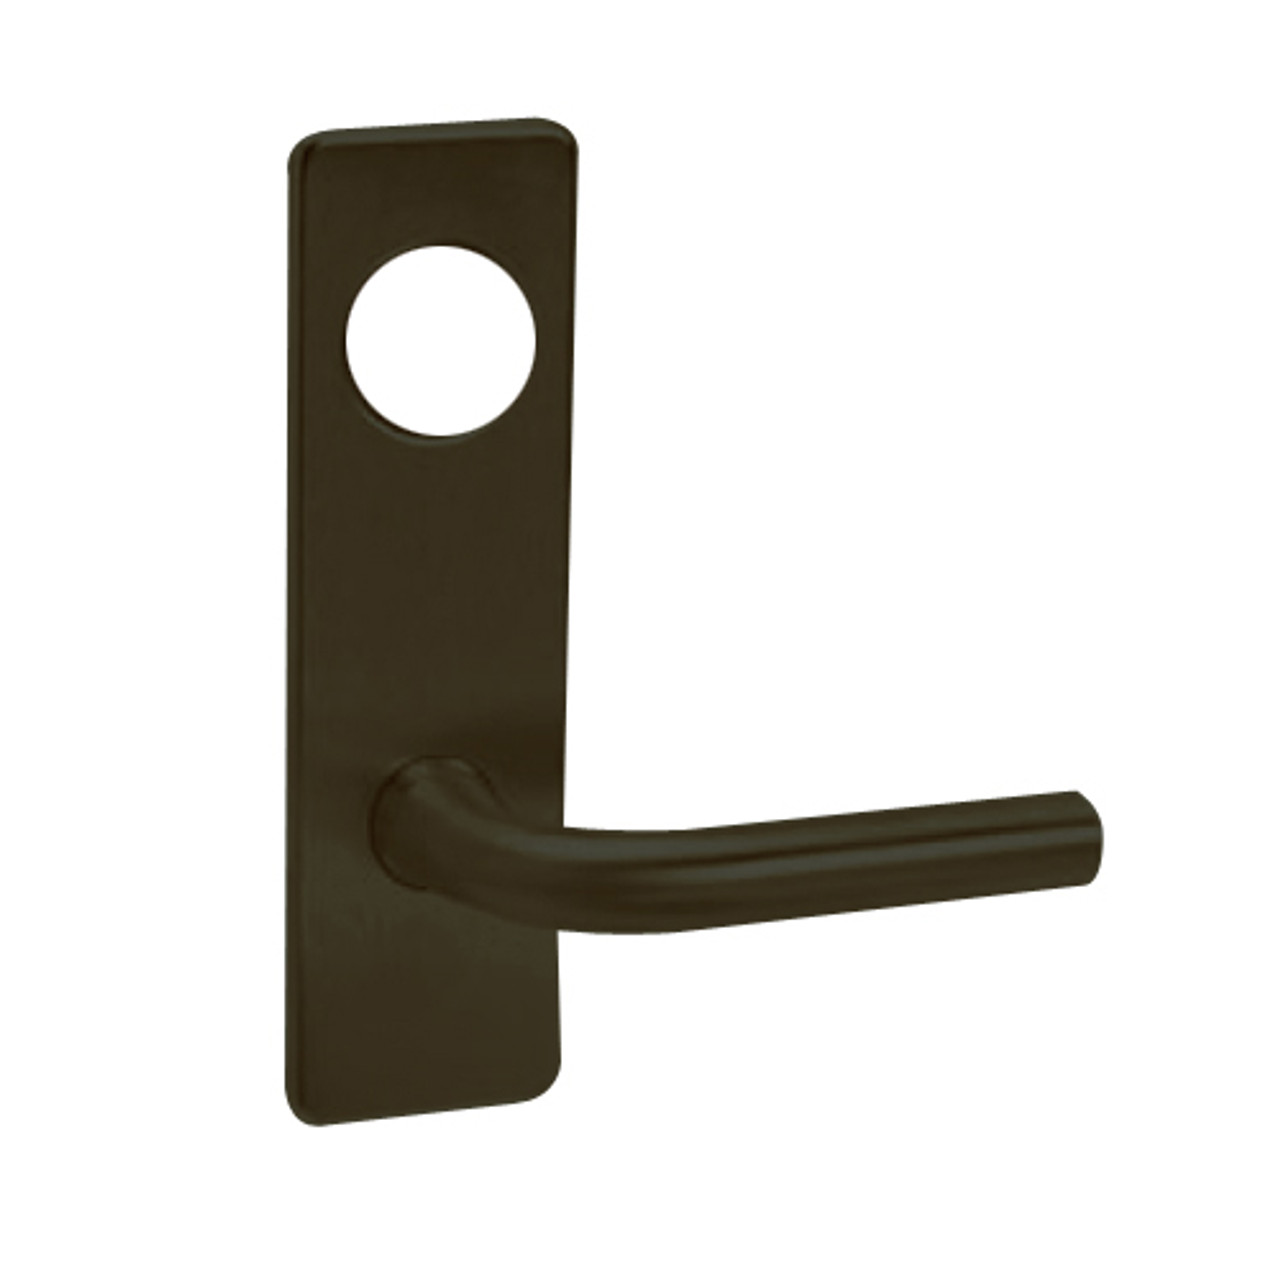 ML2048-RSP-613-LC Corbin Russwin ML2000 Series Mortise Entrance Locksets with Regis Lever in Oil Rubbed Bronze